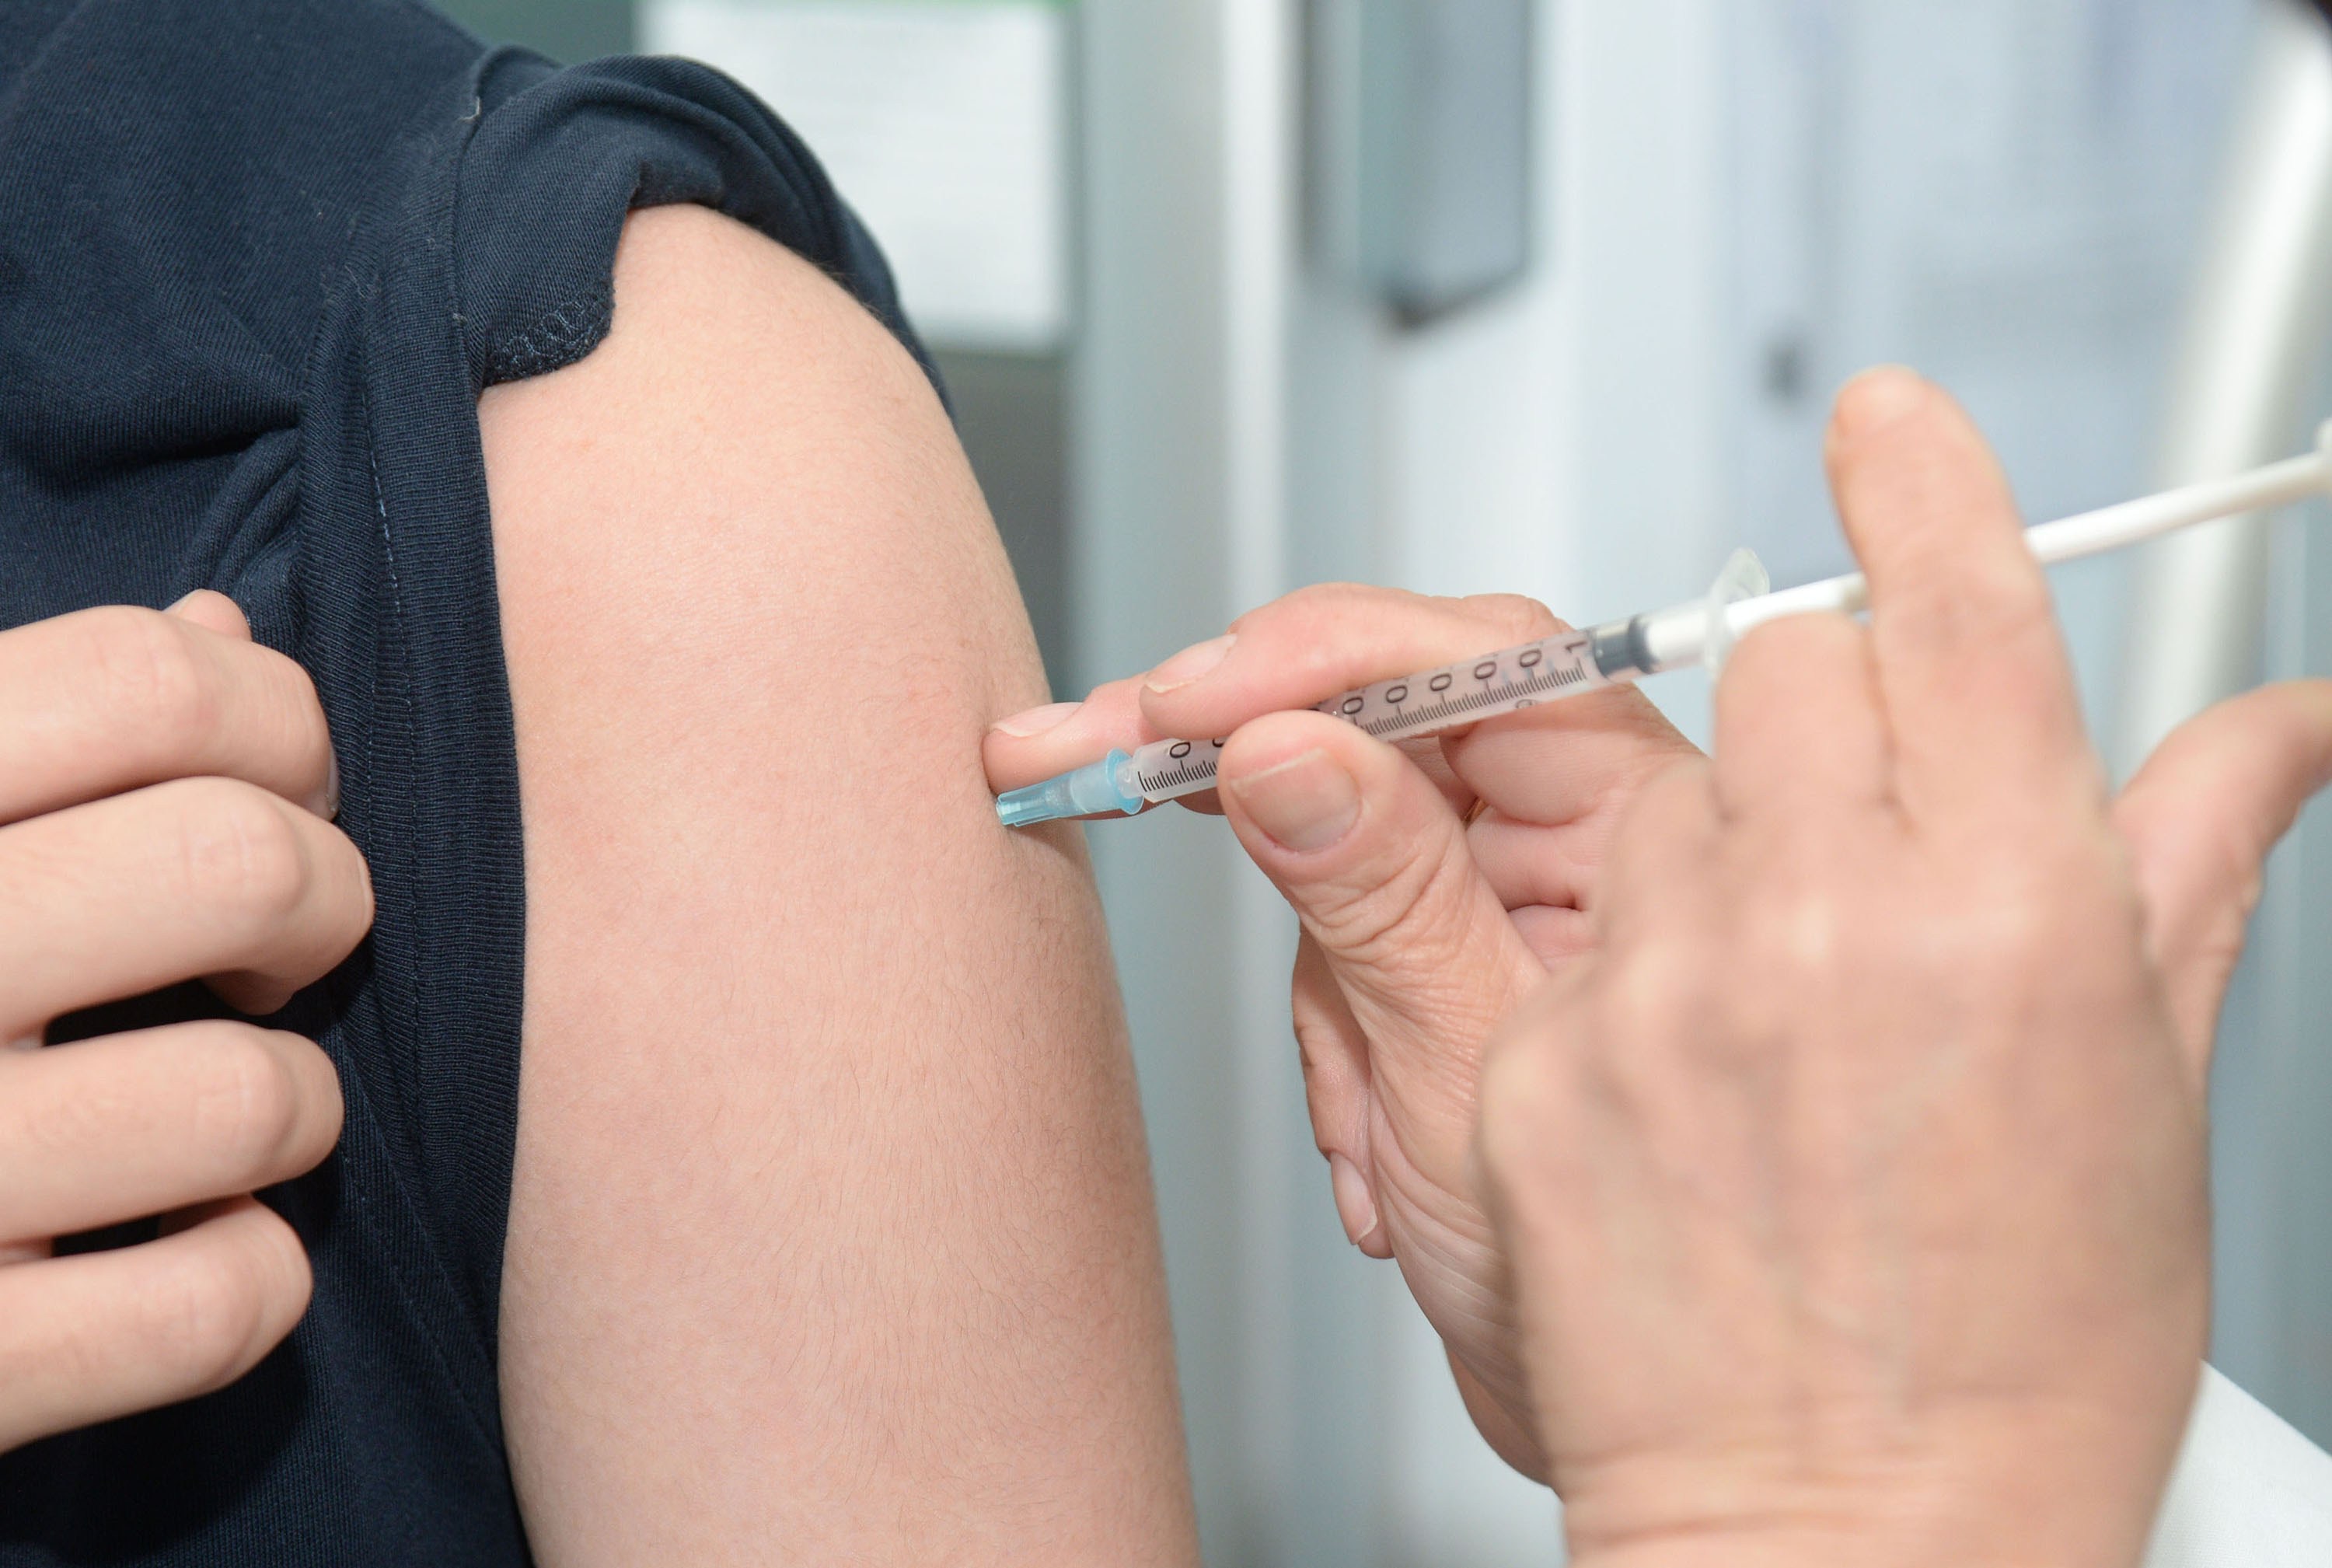 A Vaccine Being Administered Into A Patient's Arm